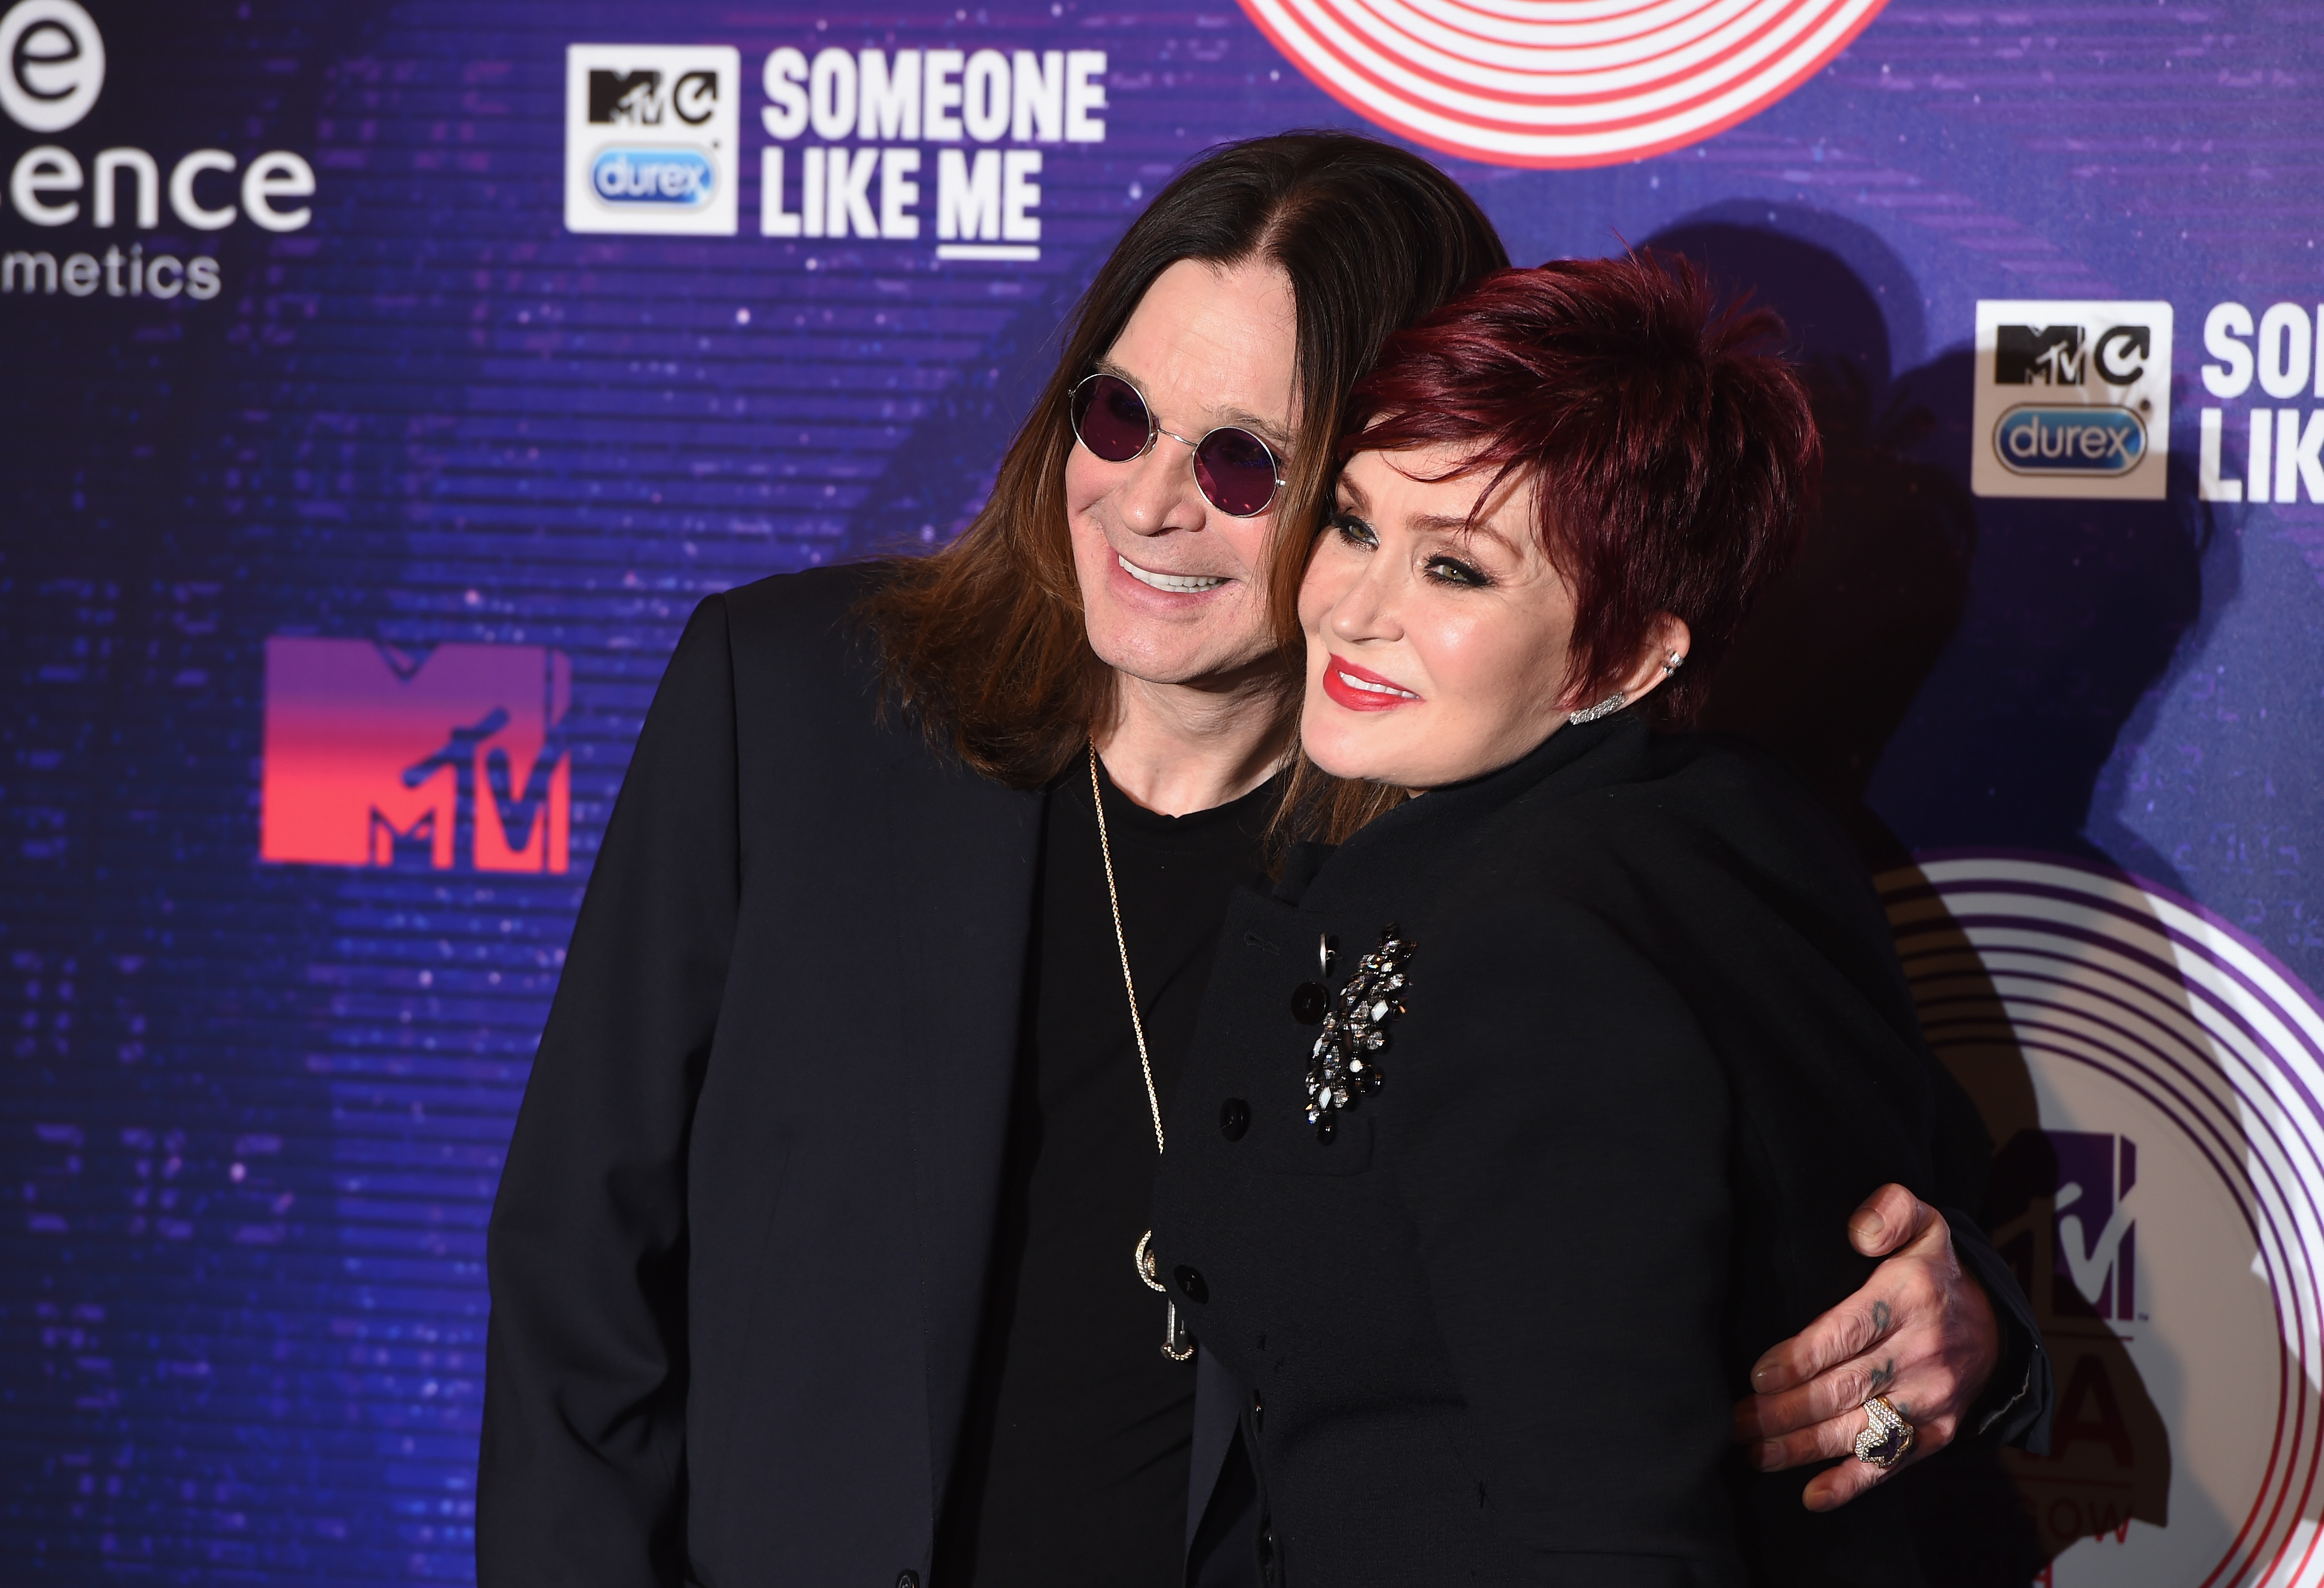 Ozzy Osbourne and Sharon Osbourne attend the MTV EMA's 2014 at The Hydro on November 9, 2014 in Glasgow, Scotland | Source: Getty Images